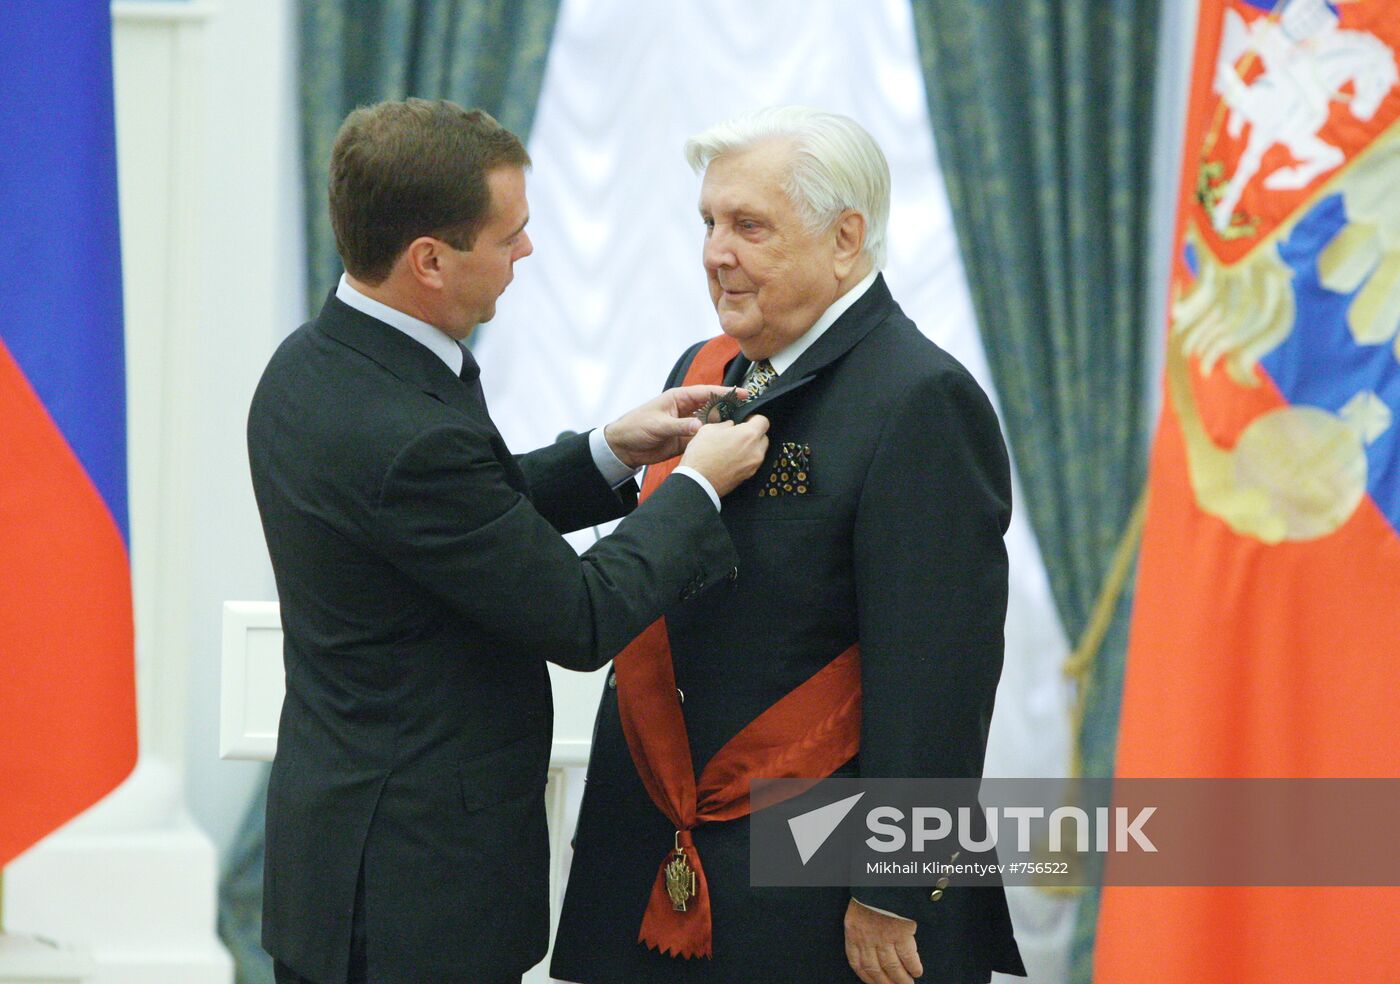 Dmitry Medvedev presents state awards to Russian citizens